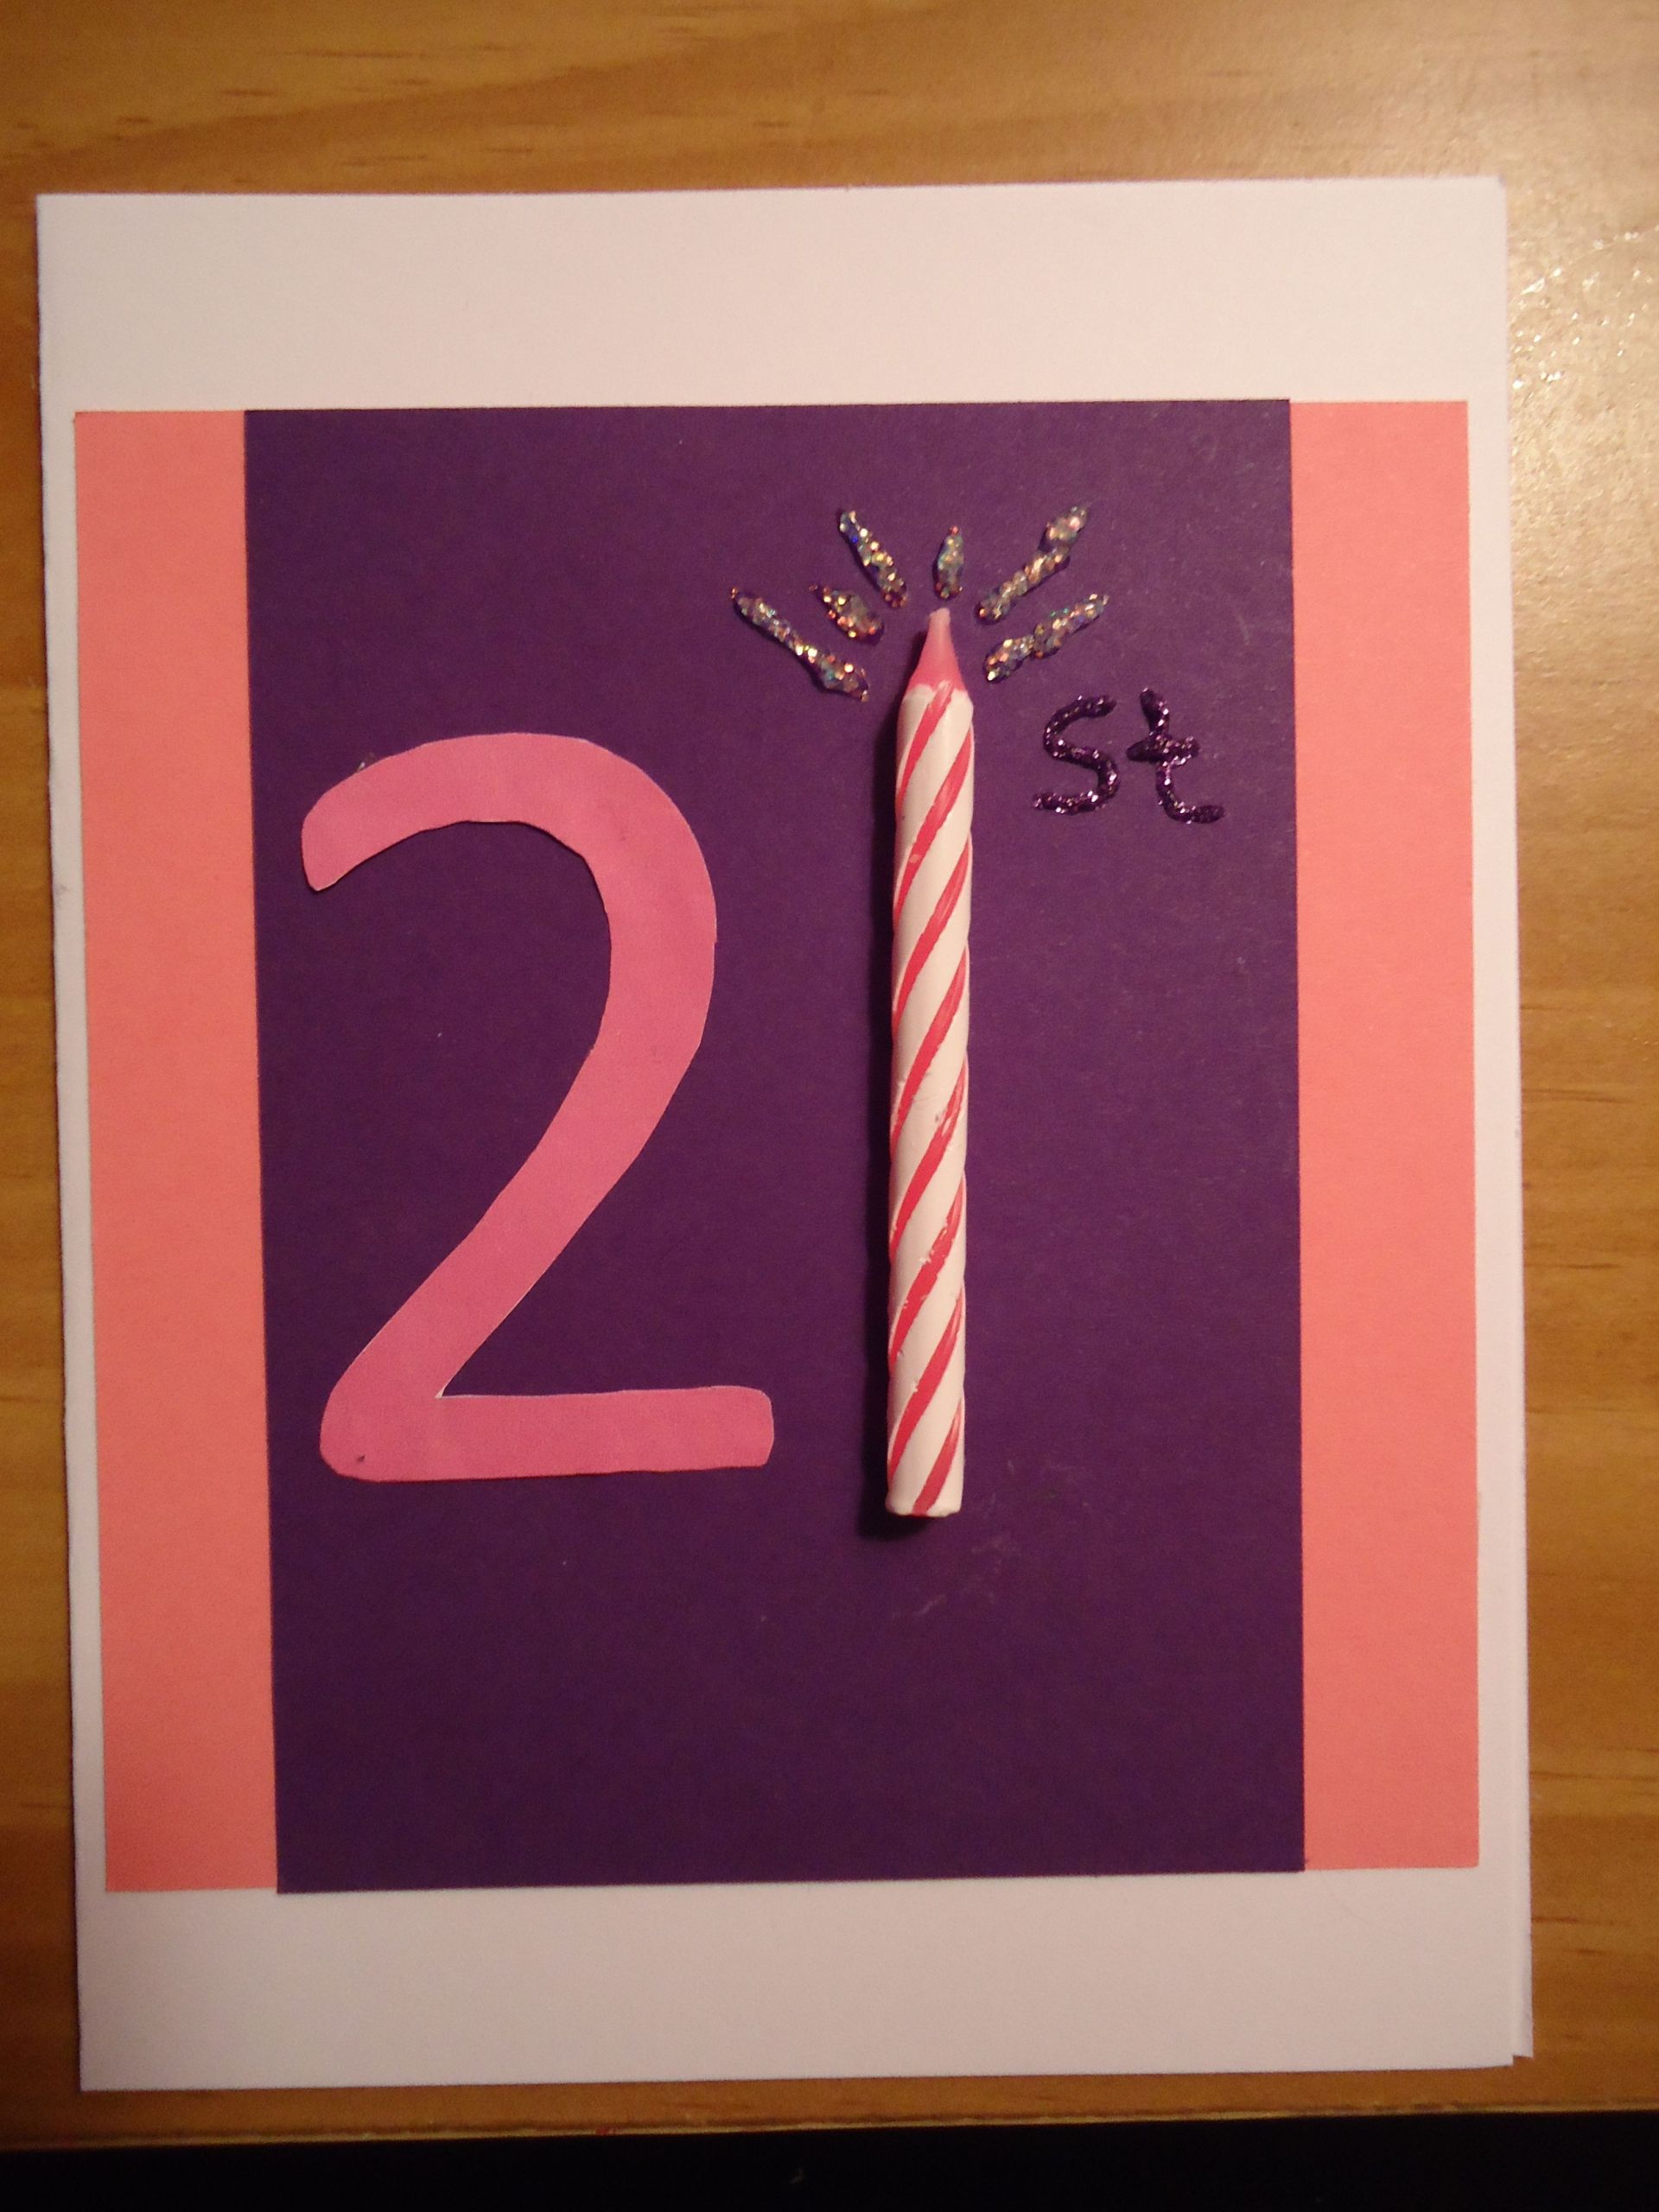 21st Birthday Card Ideas
 21st Birthday Card Replace a birthday candle for the "1